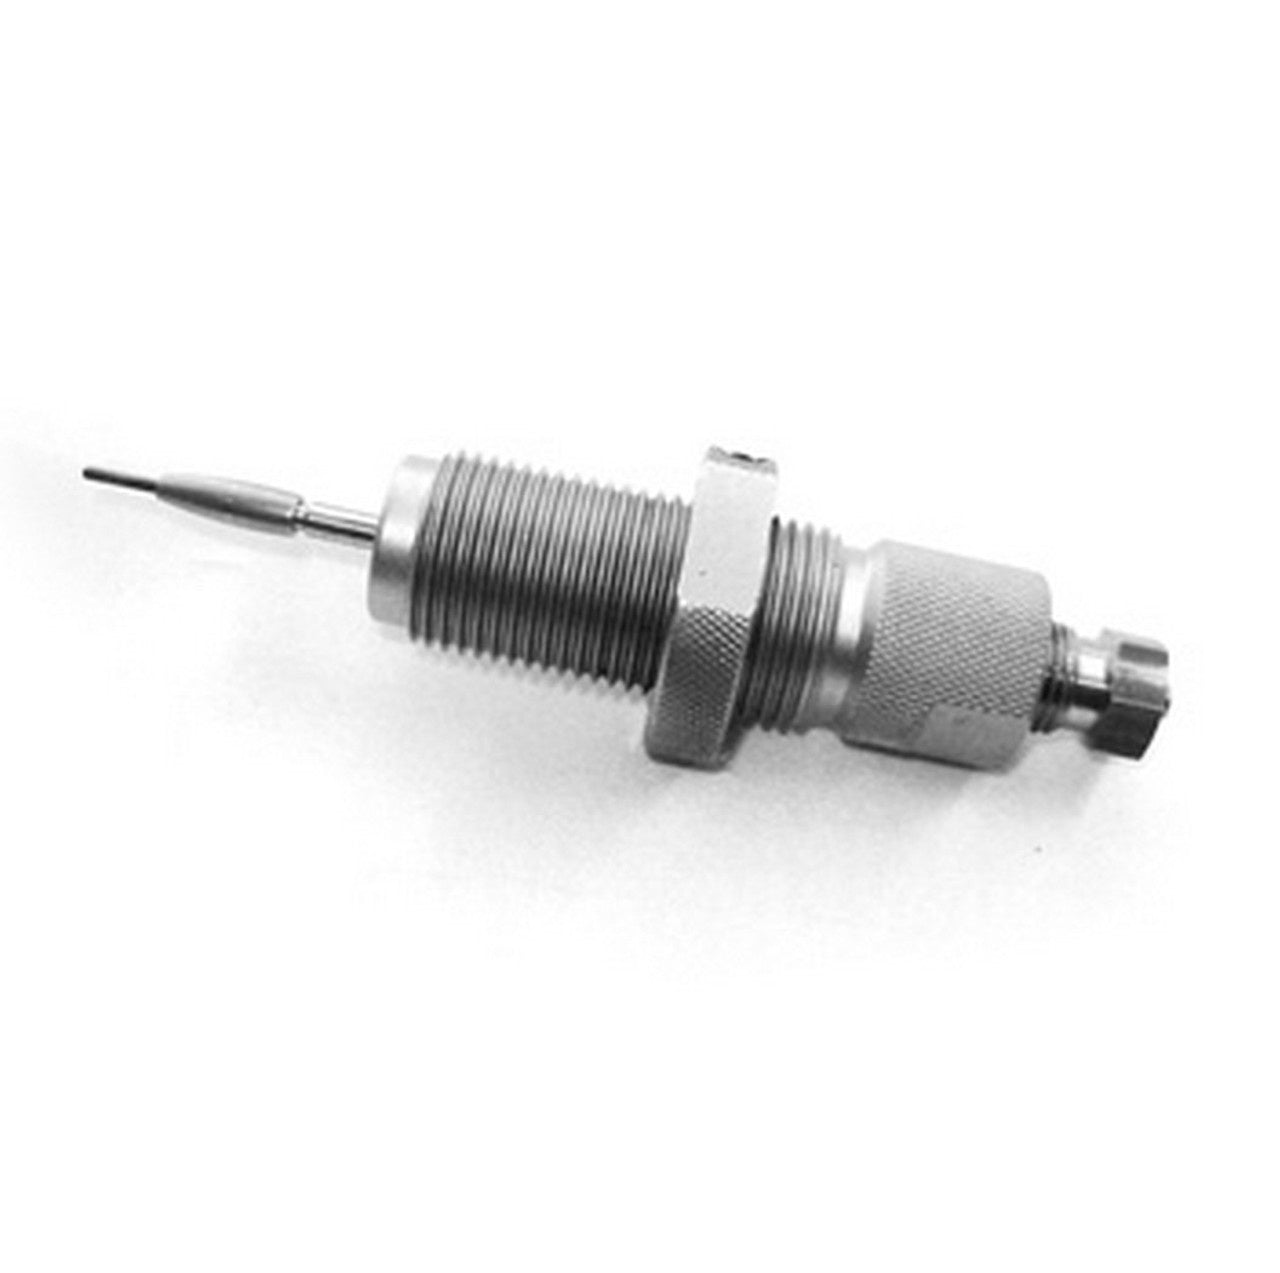 Hornady 30 cal neck sizing die